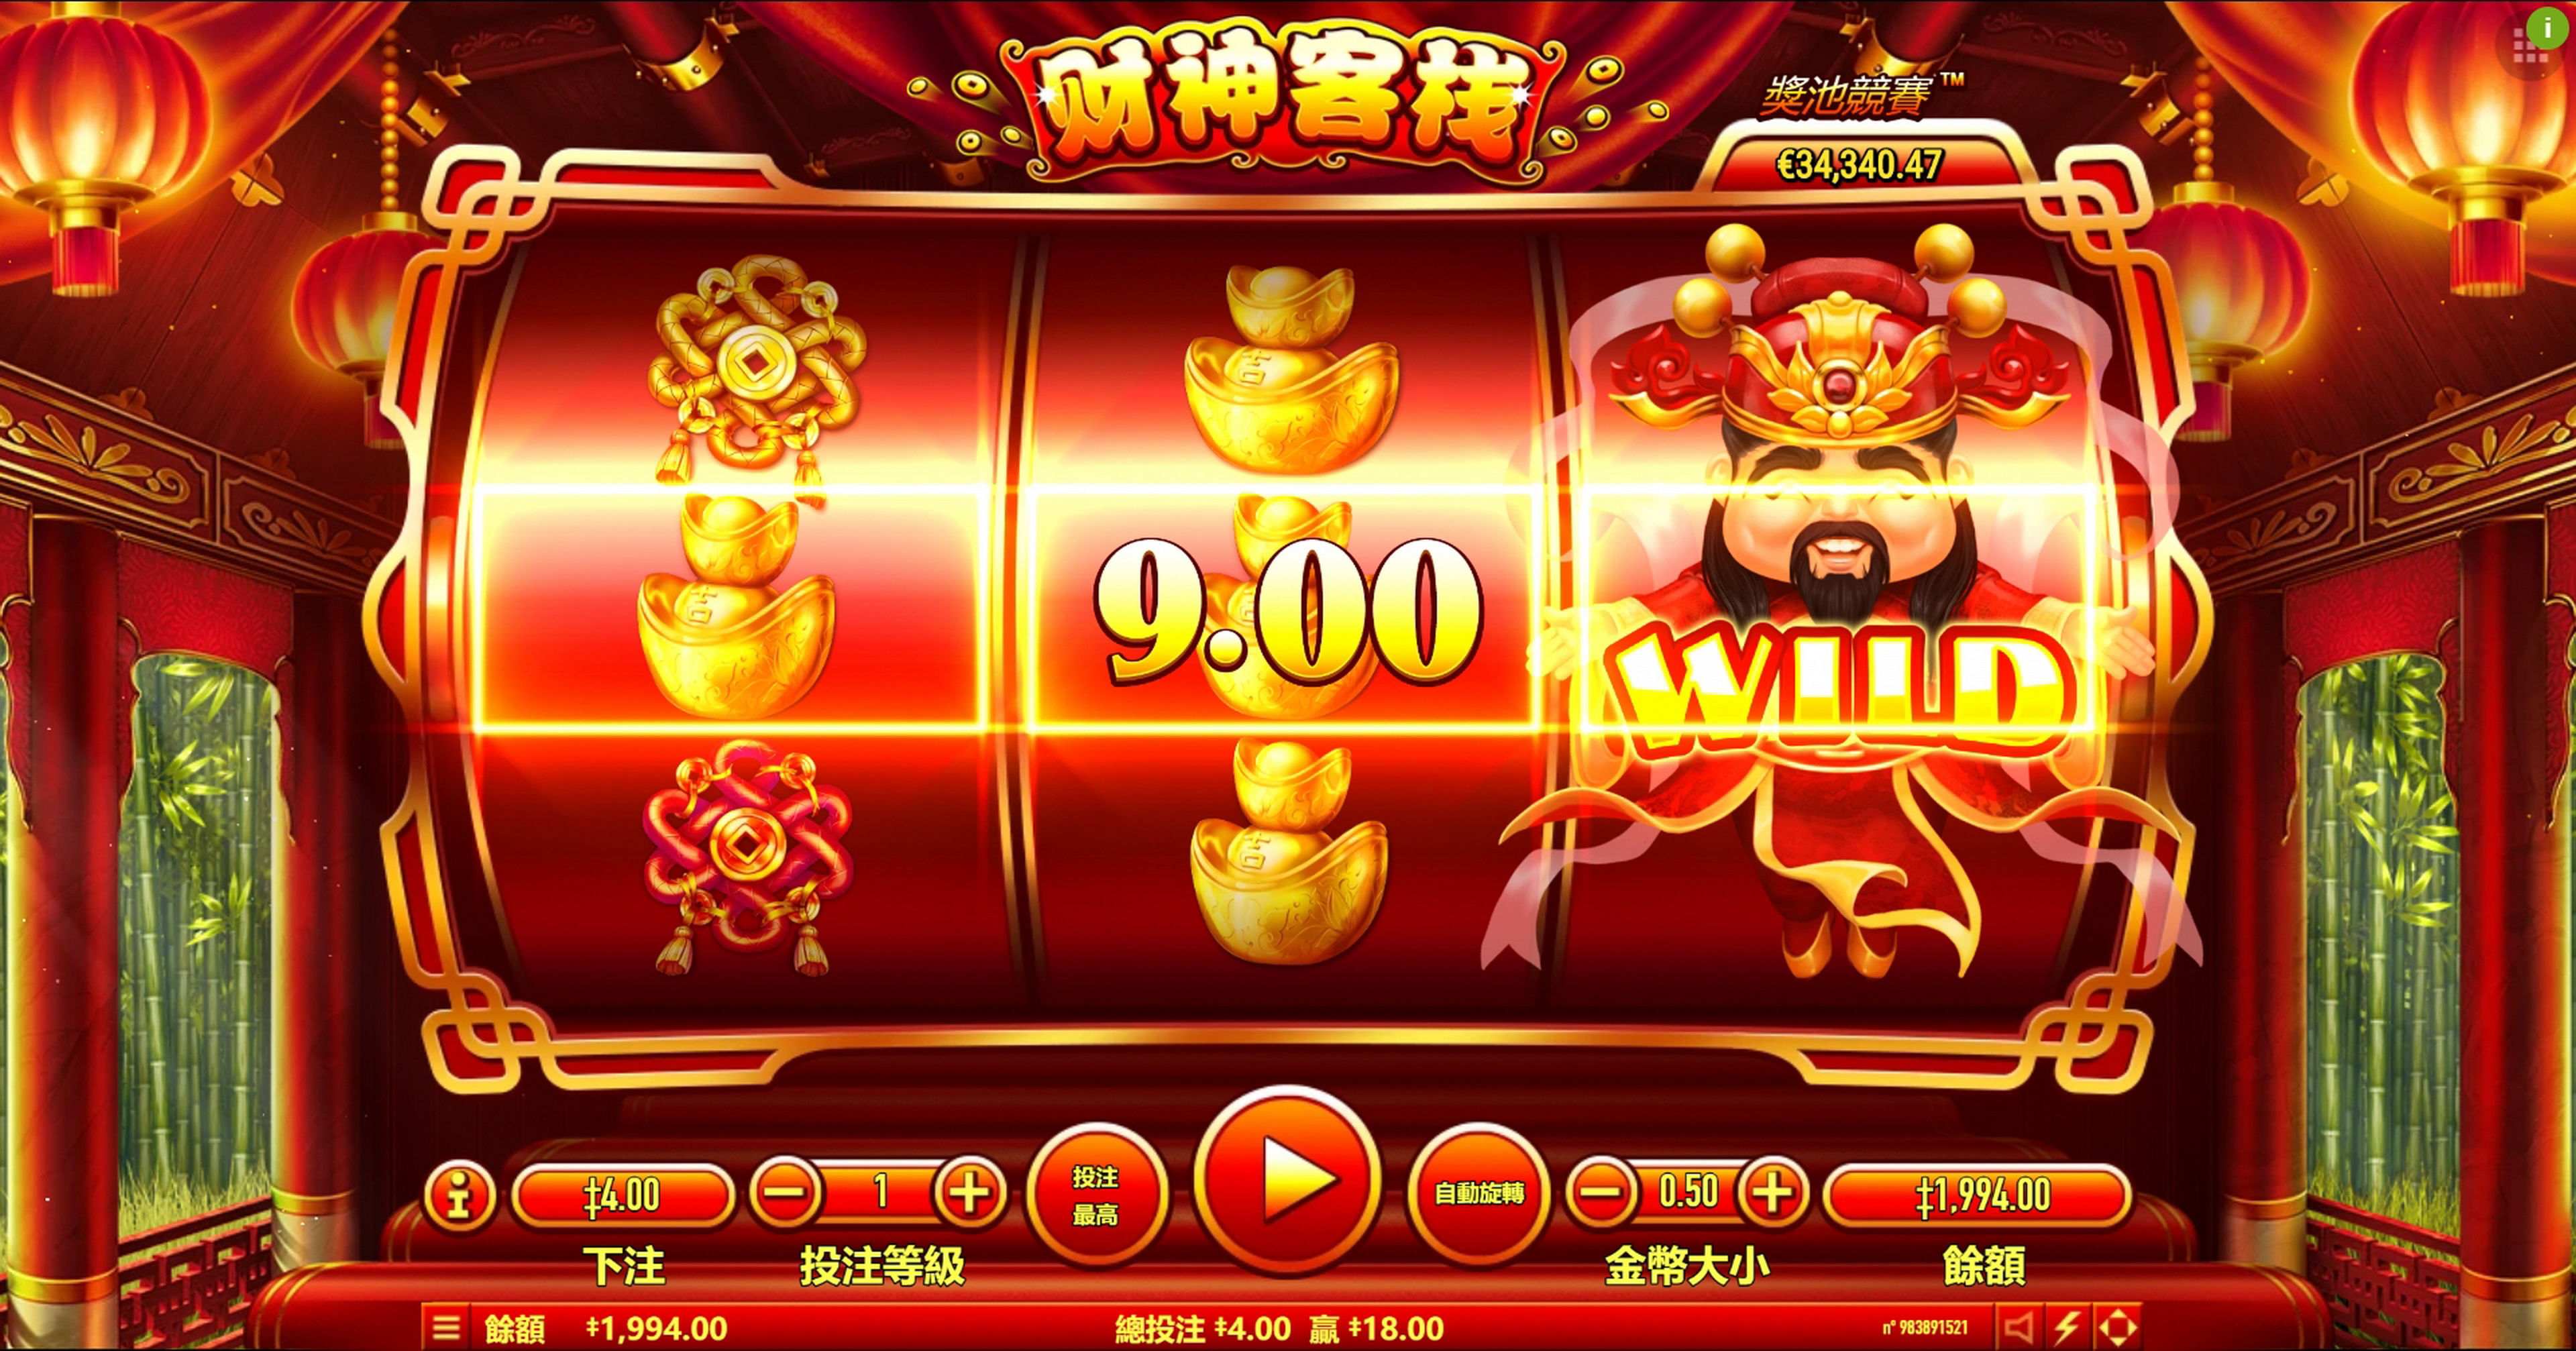 Win Money in Wealth Inn Free Slot Game by Habanero